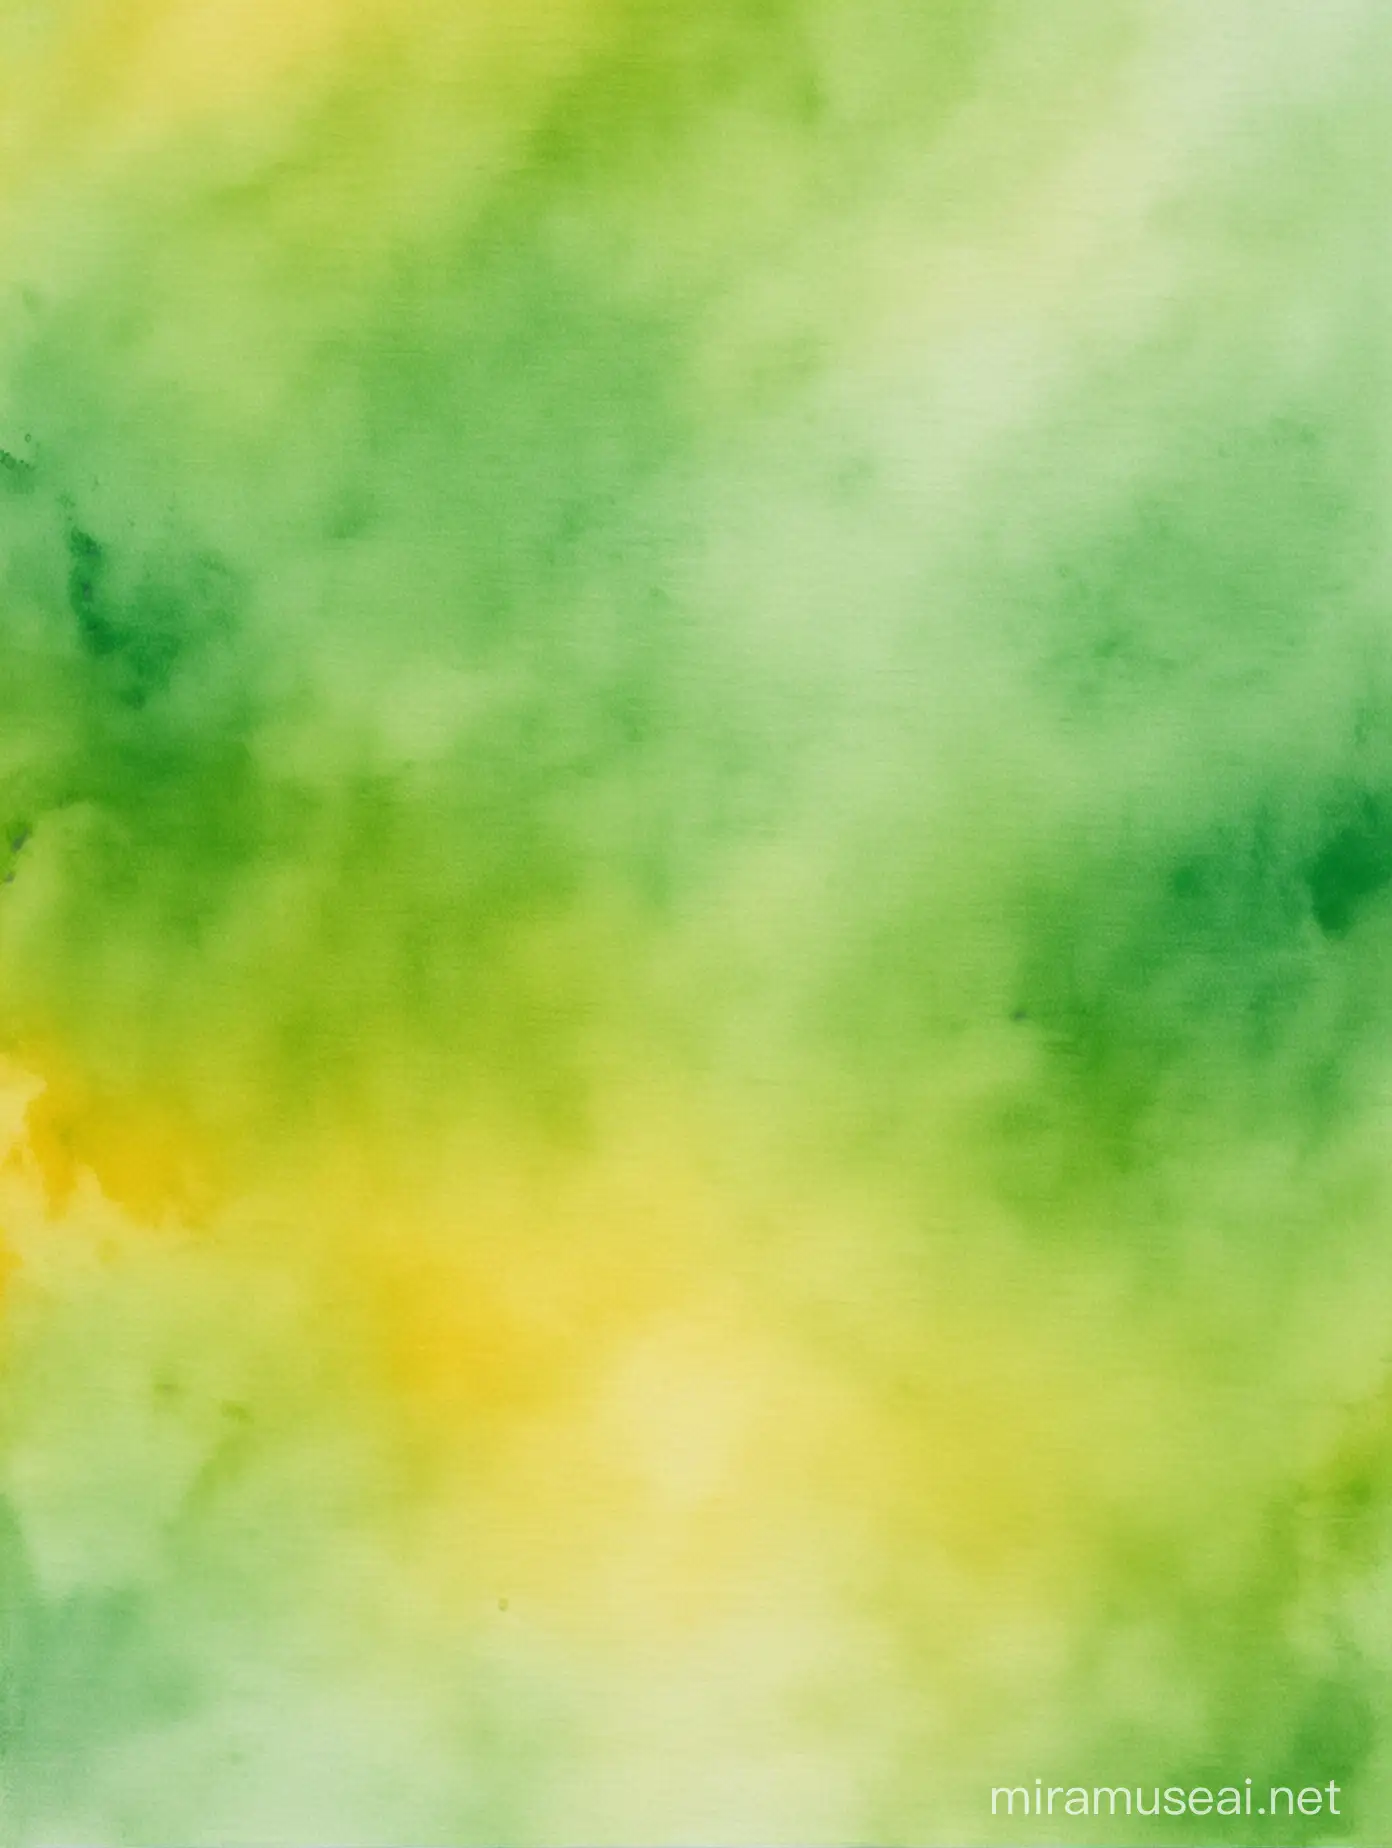 green and yellow
water color background